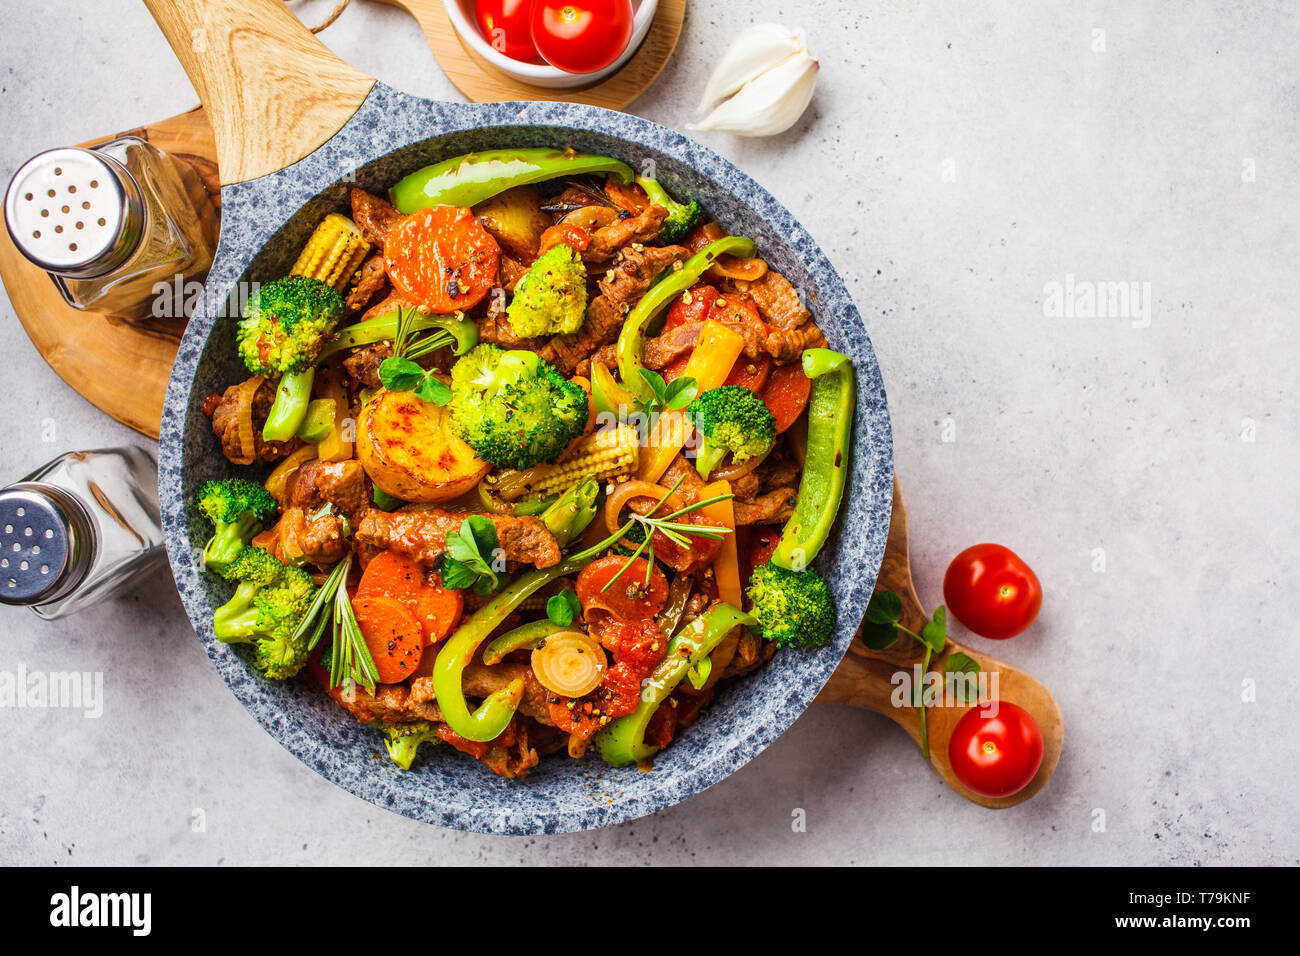 Fried beef stroganoff with potatoes, broccoli, corn, pepper, carrots and sauce in a pan, white background. Stock Photo